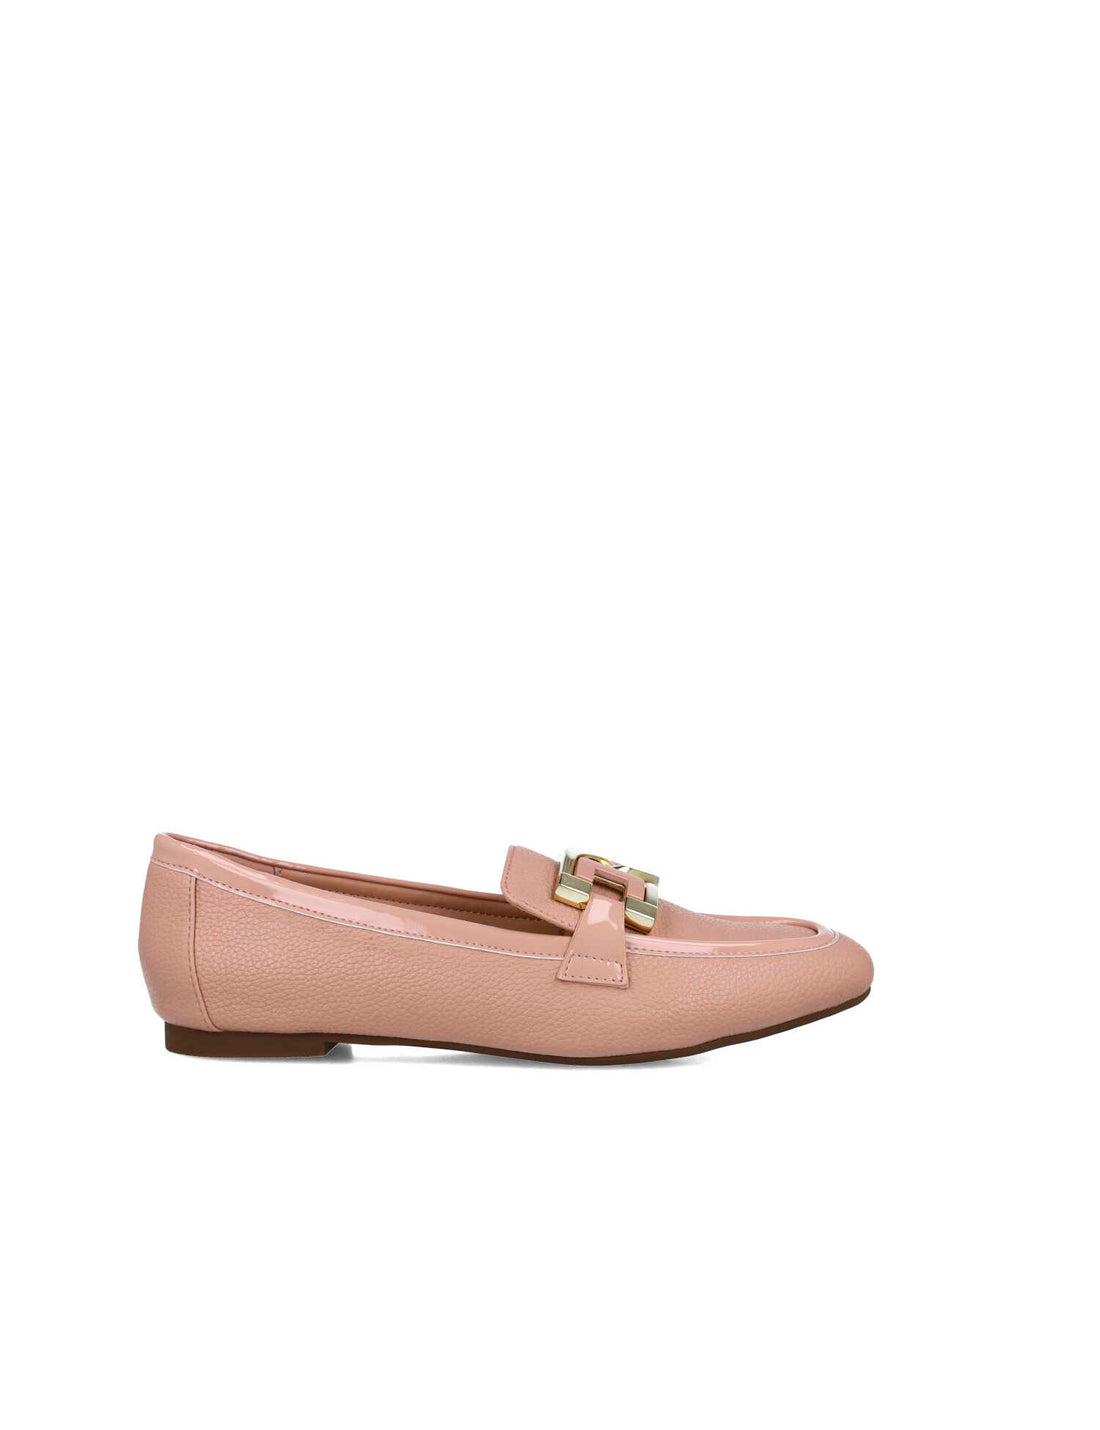 Pink Loafers With Gold Buckle_25298_97_01